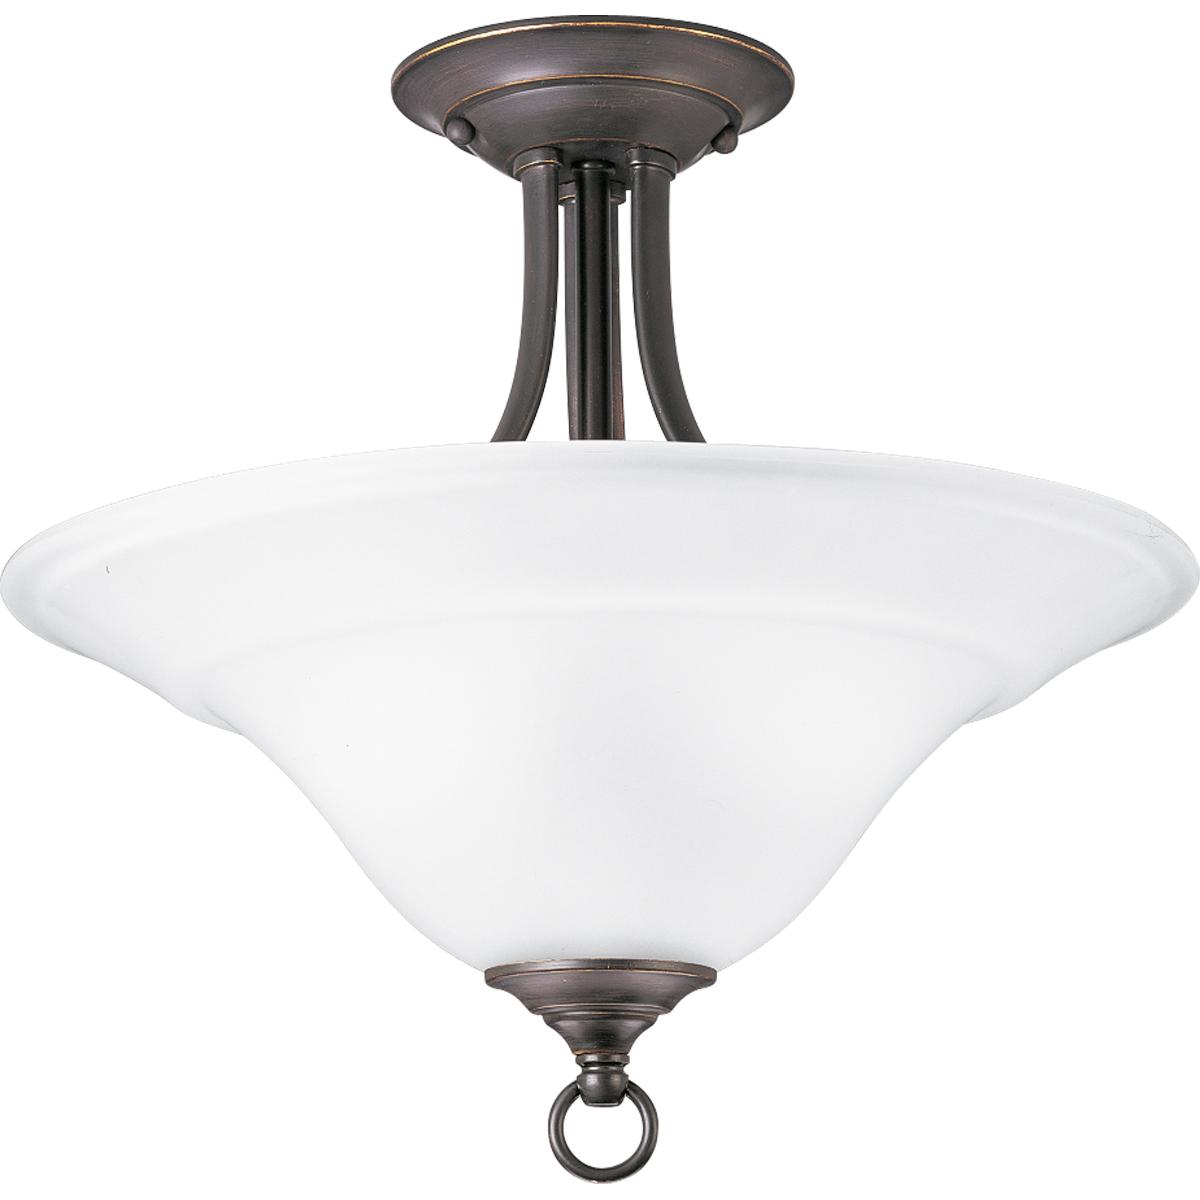 Hubbell P3473-20 Two-light semi-flush close-to-ceiling fixture featuring soft angles, curving lines and etched glass shades. Gracefully exotic, the Trinity Collection offers classic sophistication for transitional interiors. Sculptural forms of metal and glass are enhance